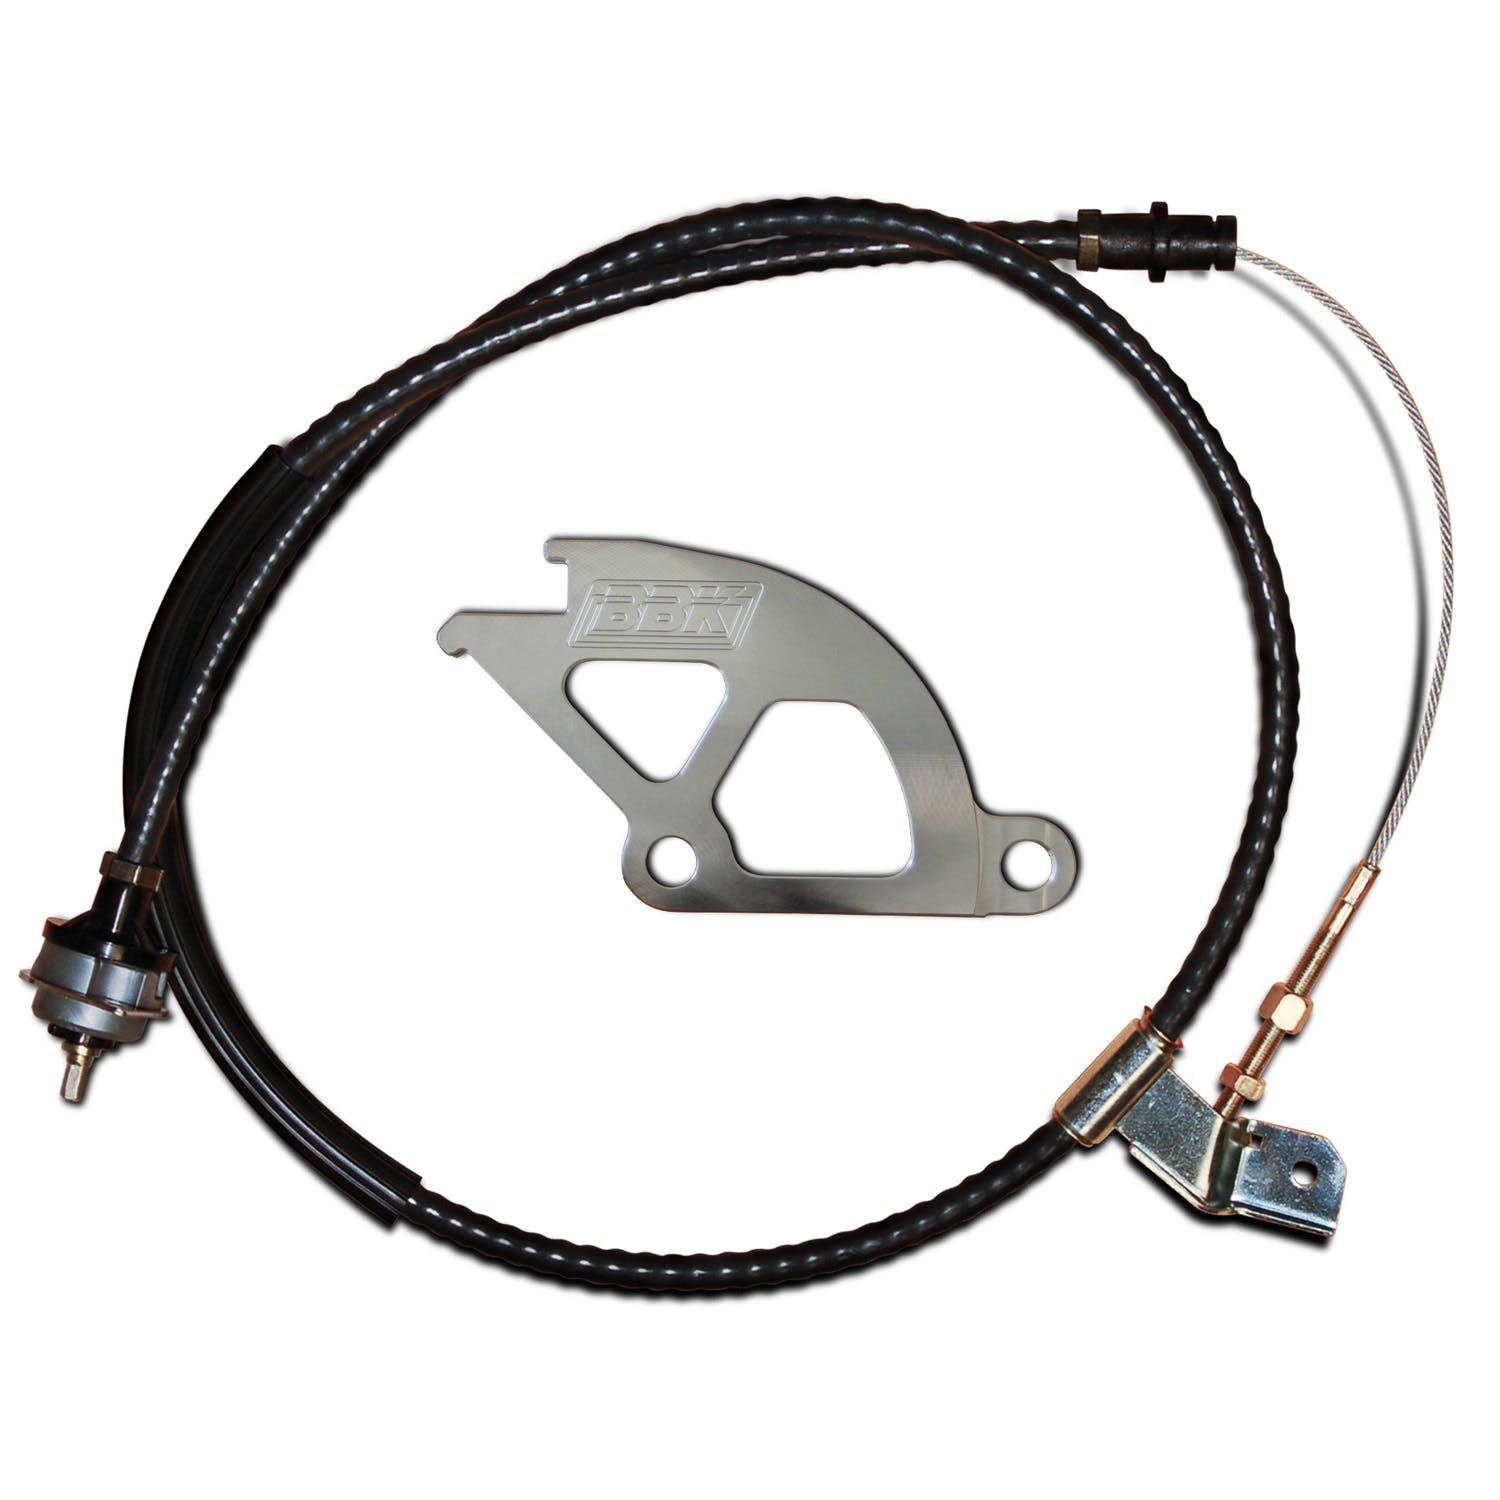 BBK Performance Parts 1505 Clutch Quadrant And Cable Kit